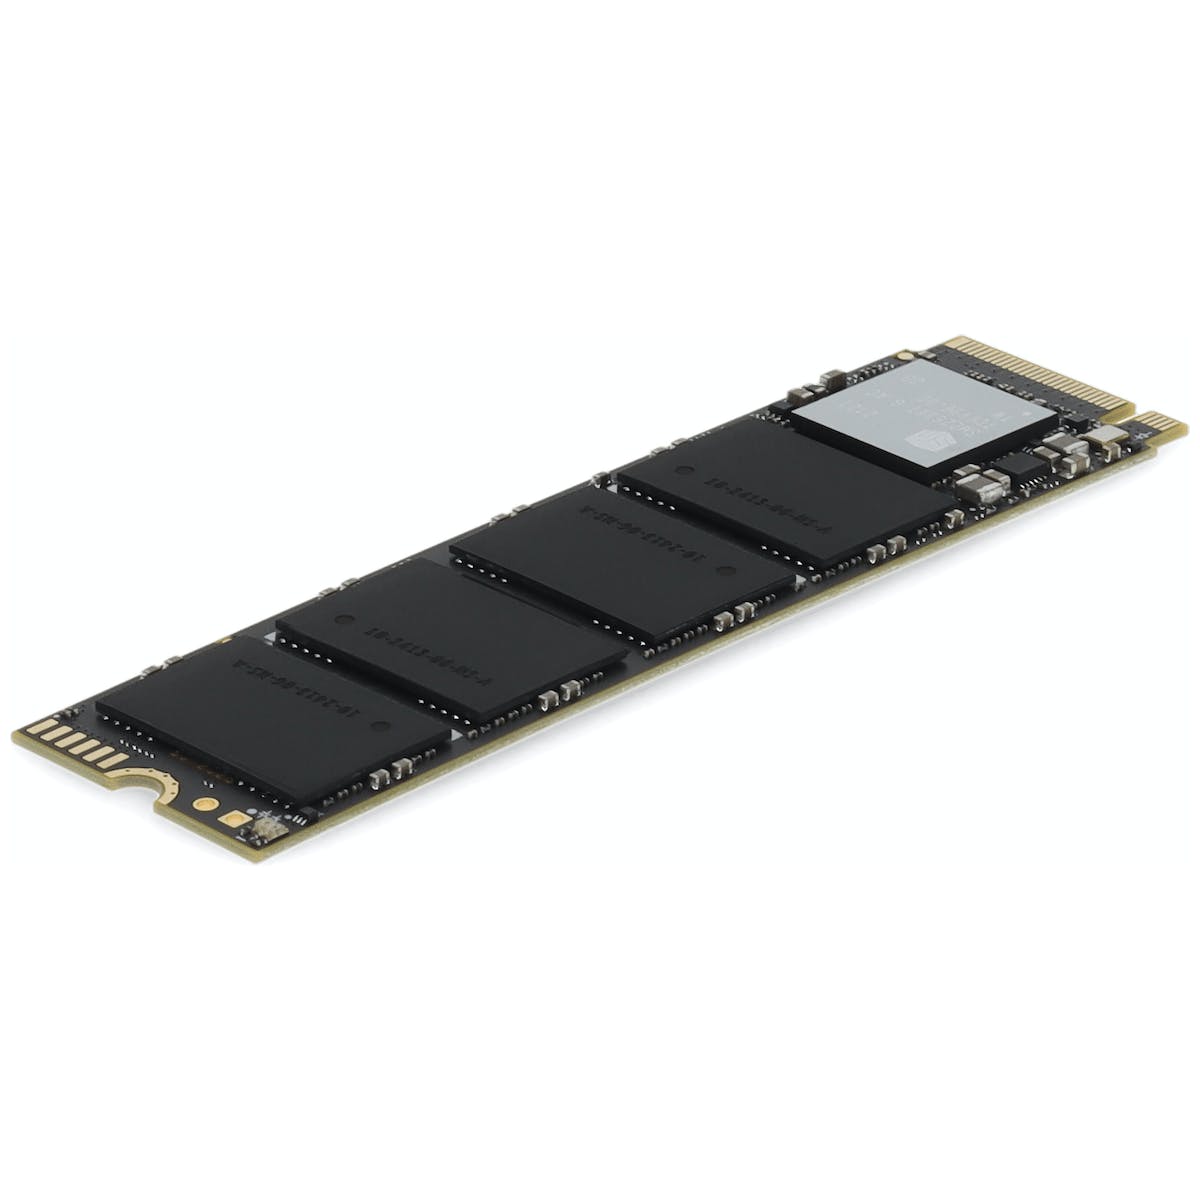 Picture of Addon ADD-SSDHL512GB-D8 512GB M.2 2280 PCIe Gen 3 x4 NVMe 1.3 Solid State Drive